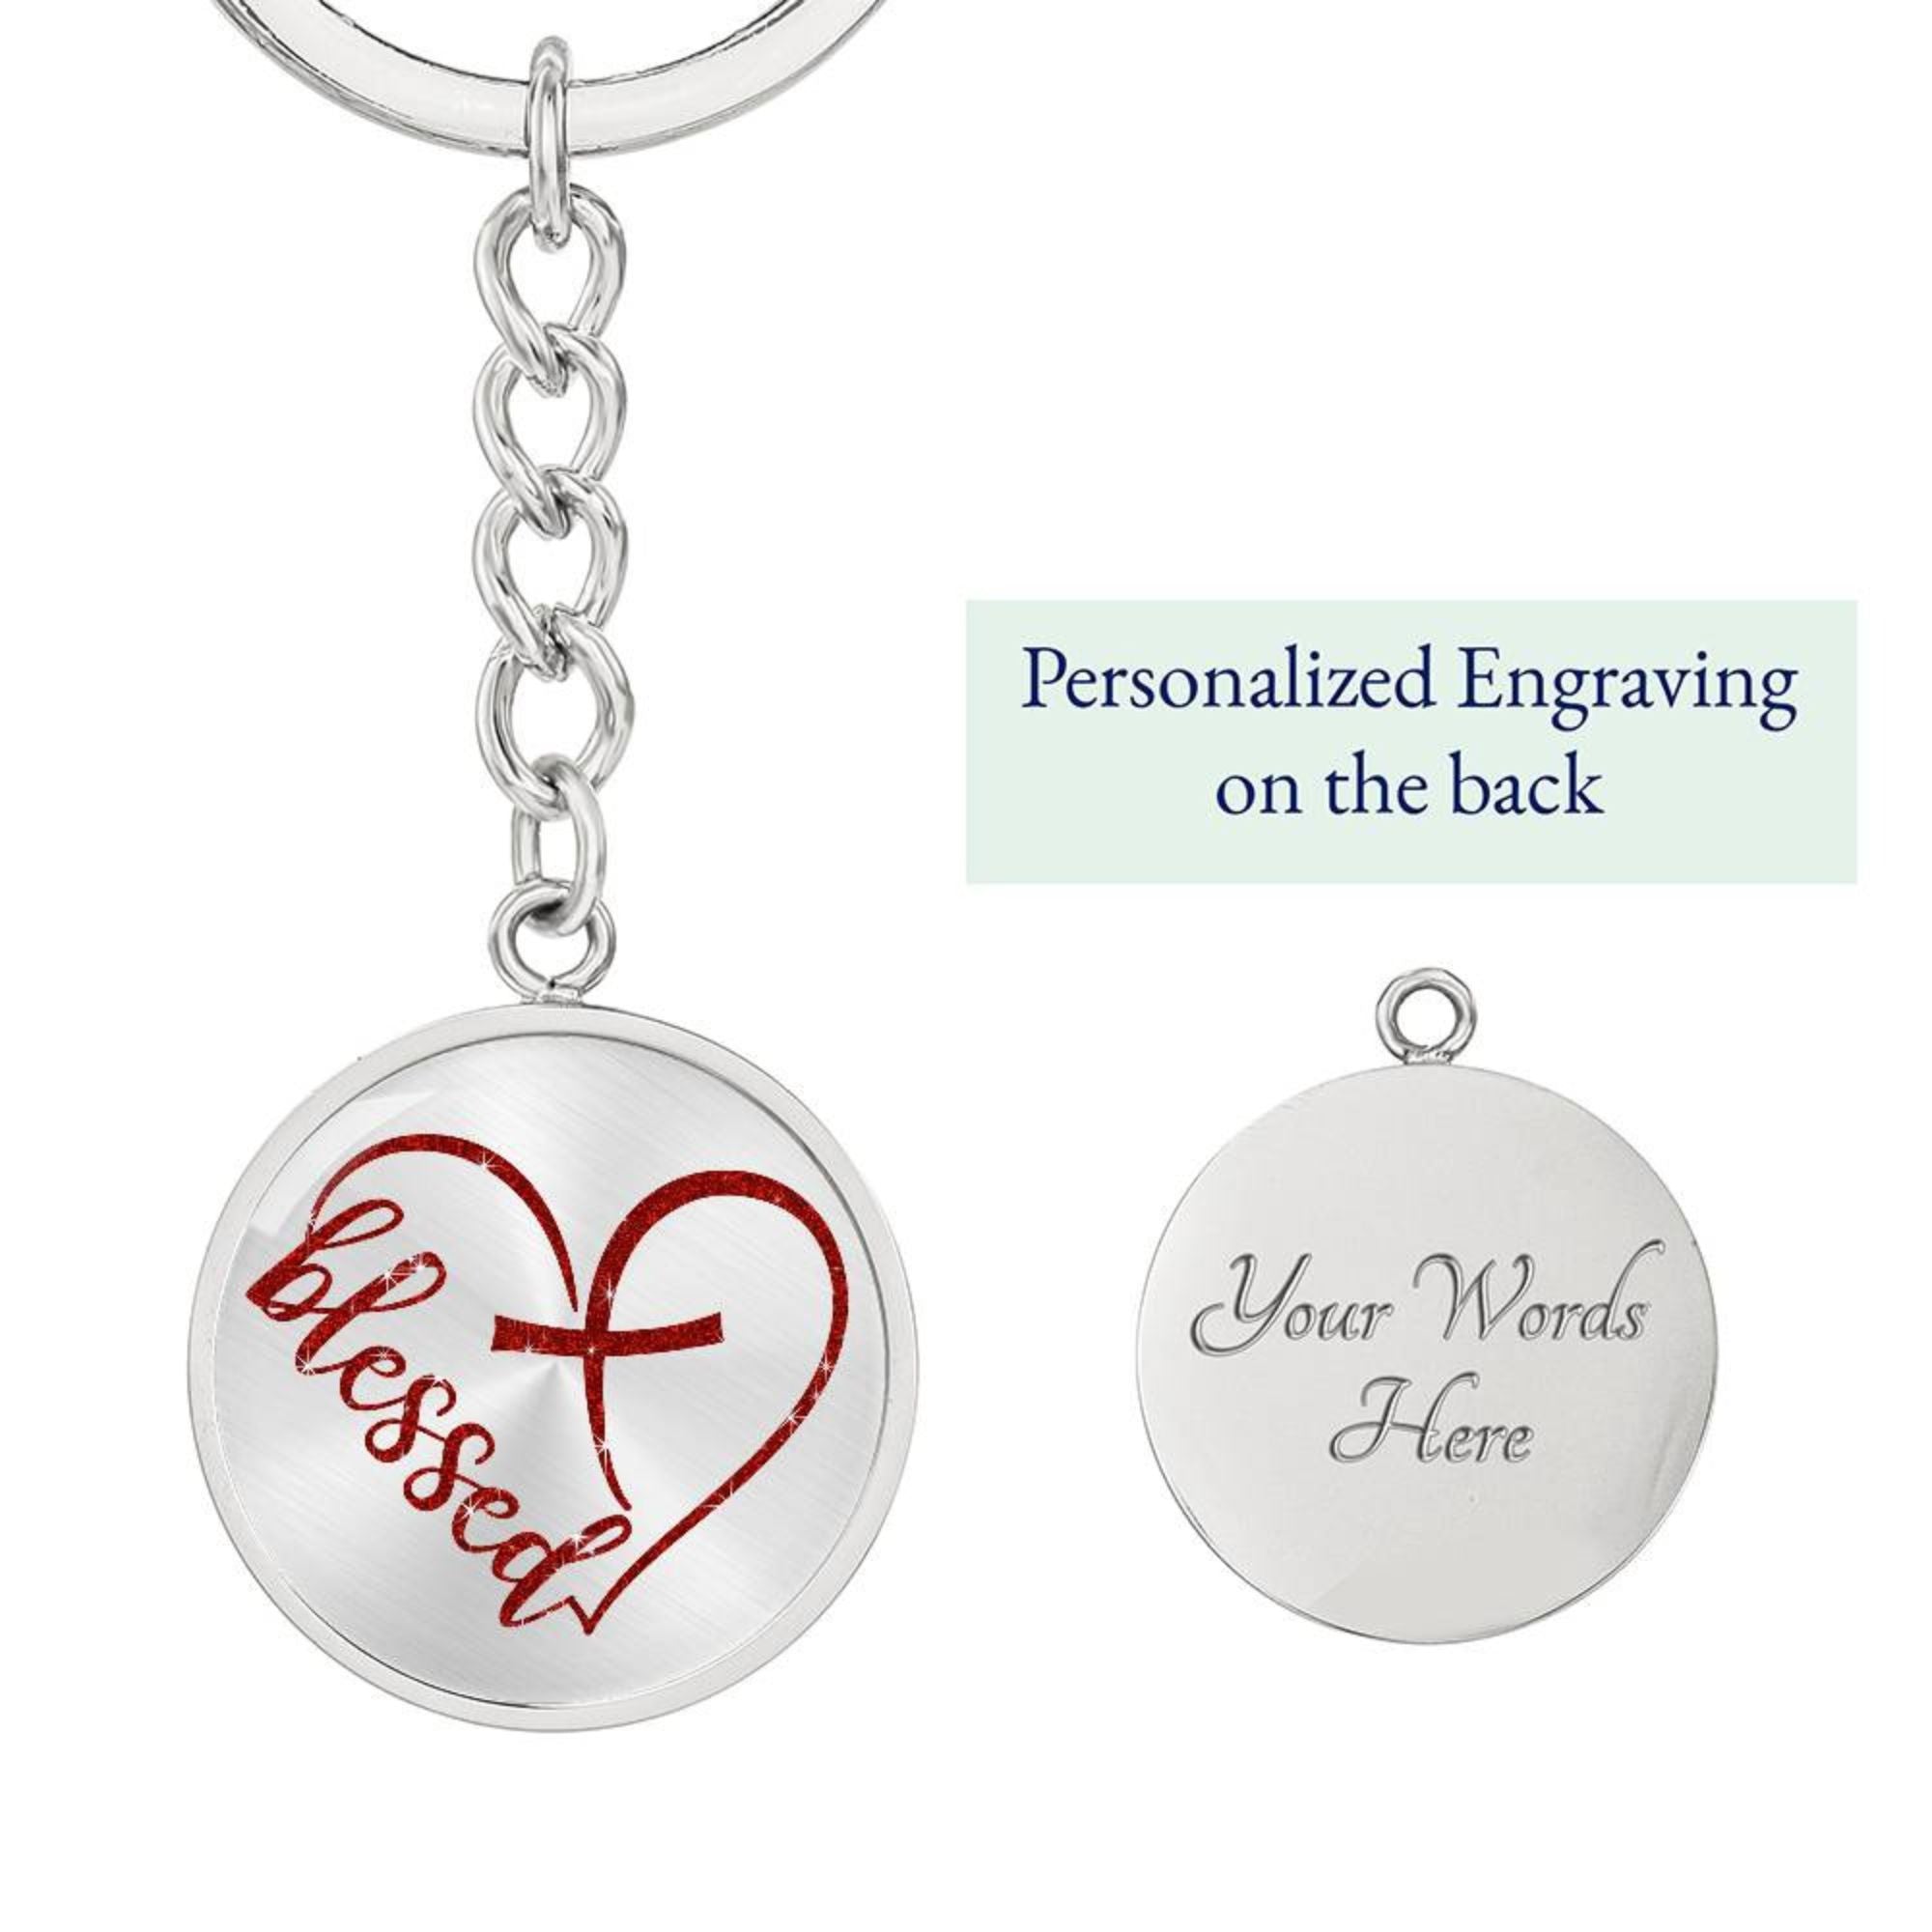 Blessed Heart with Embedded Cross - Red Glitter Circle Keychain Engraving: Yes Jesus Passion Apparel